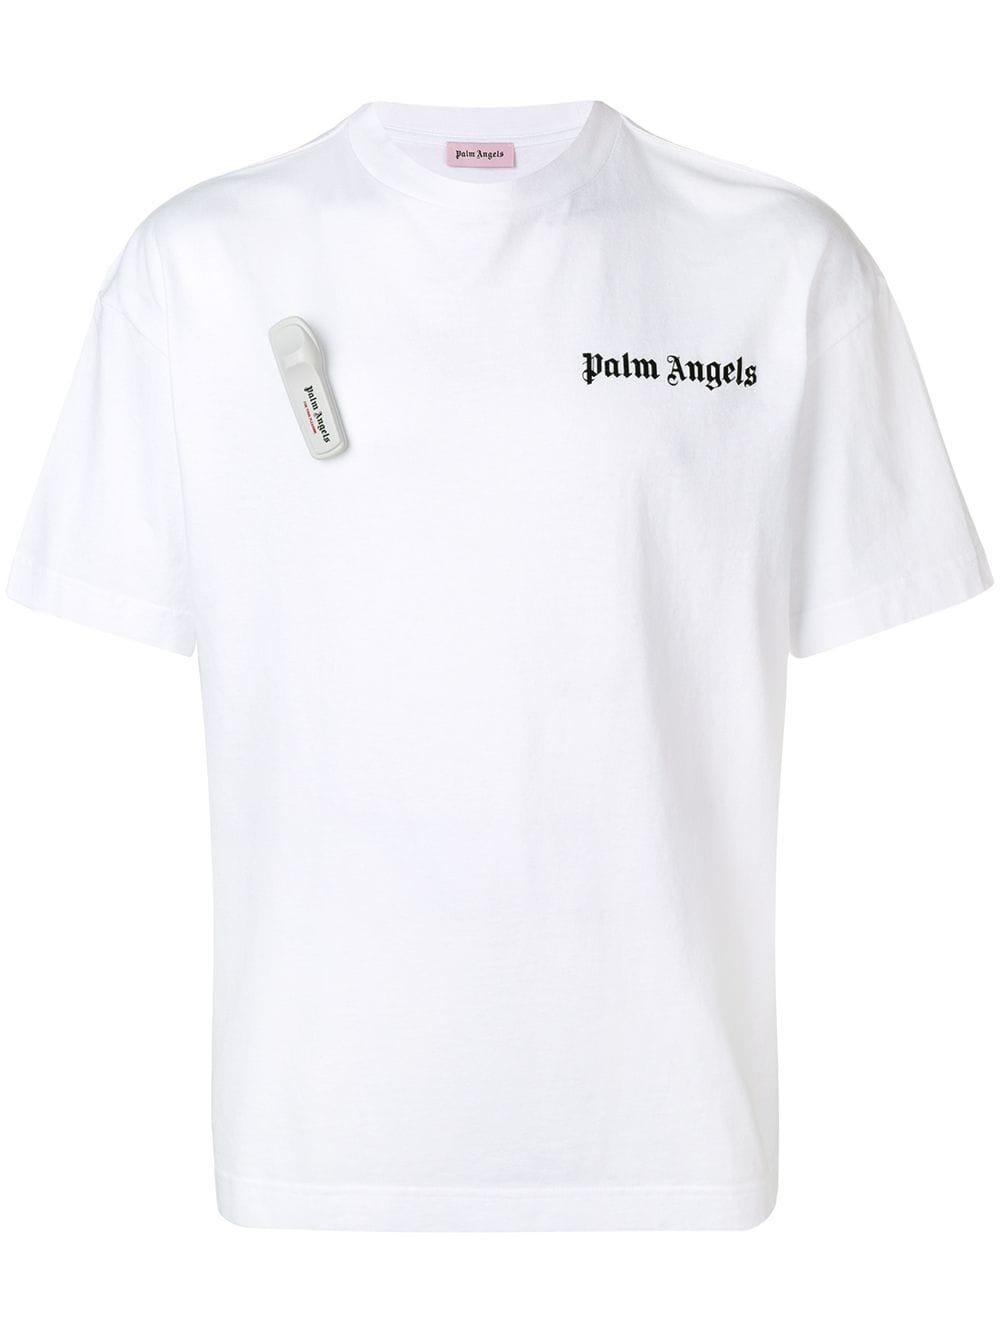 palm angels t shirt security tag